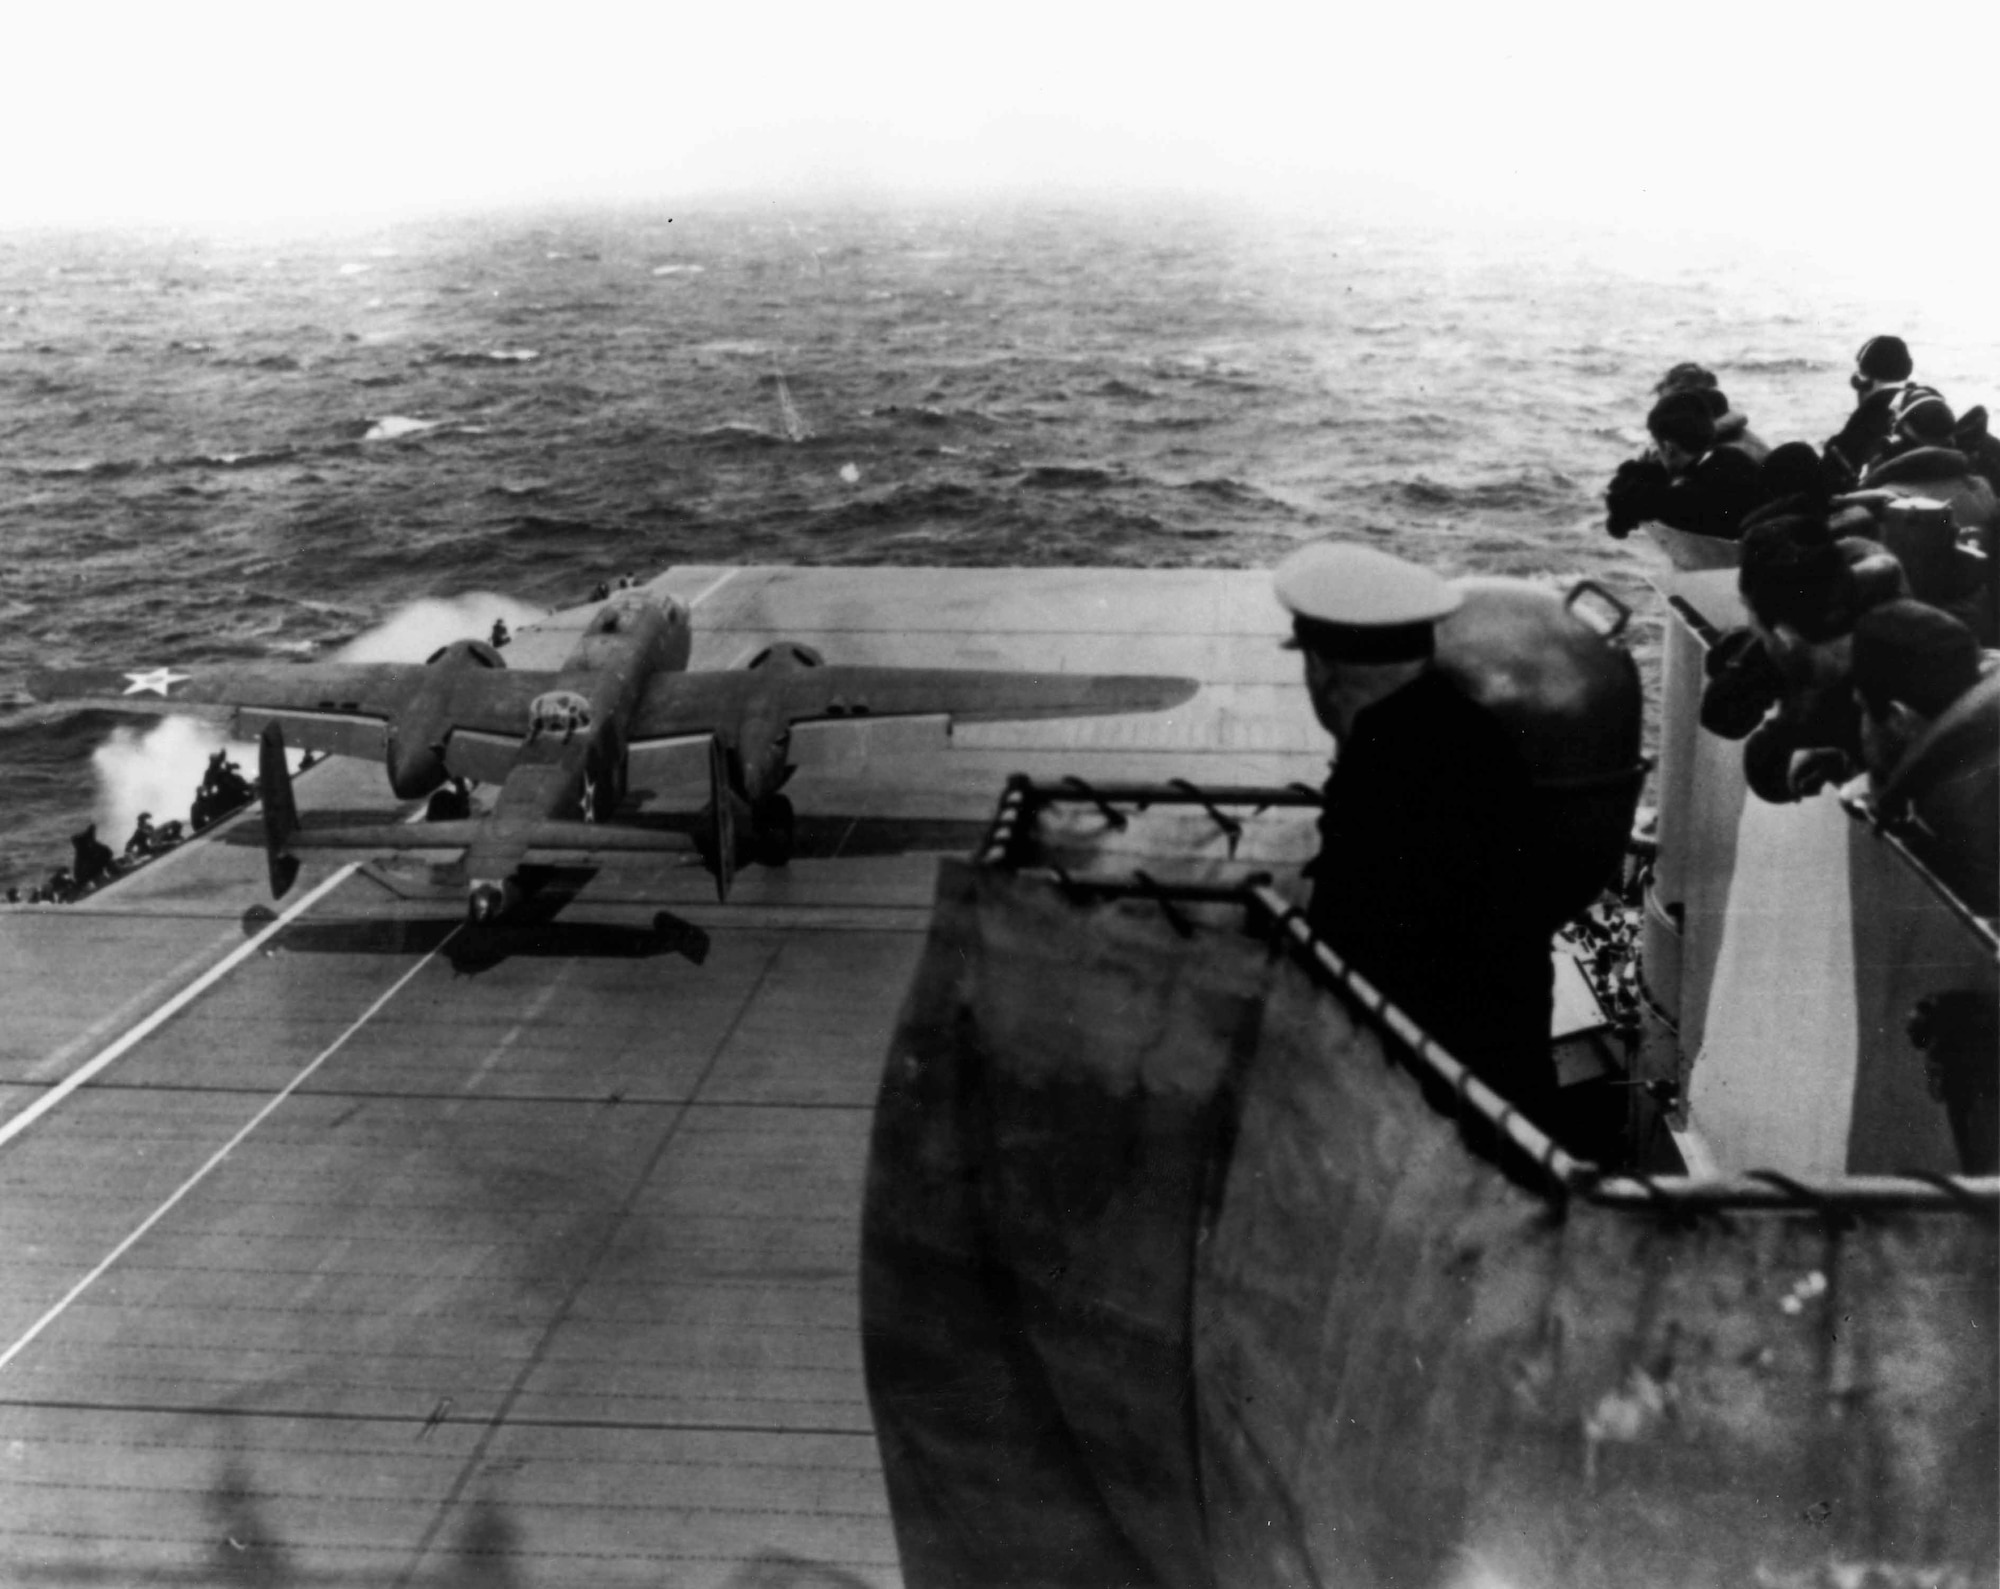 A modified B-25B Mitchell medium bomber takes off from the US Navy aircraft carrier USS Hornet (CV-8) to attack the Home Islands of Imperial Japan on April 18, 1942, about 170-miles short of their planned takeoff point after the carrier task force was spotted by an enemy patrol ship.  The bombers launched earlier than desired but for the most part managed to hit their assigned targets.  Then after 13 hours in the air the crews crash-landed or bailed out in various places in China as they made their way from Japan – the only intact aircraft was one B-25 which landed in the Soviet Far East and was interned with its crew by the Soviets.  None of the bombers were shot down by enemy fighters or anti-aircraft fire. (Photo courtesy of 28th Bomb Wing Historian’s office)